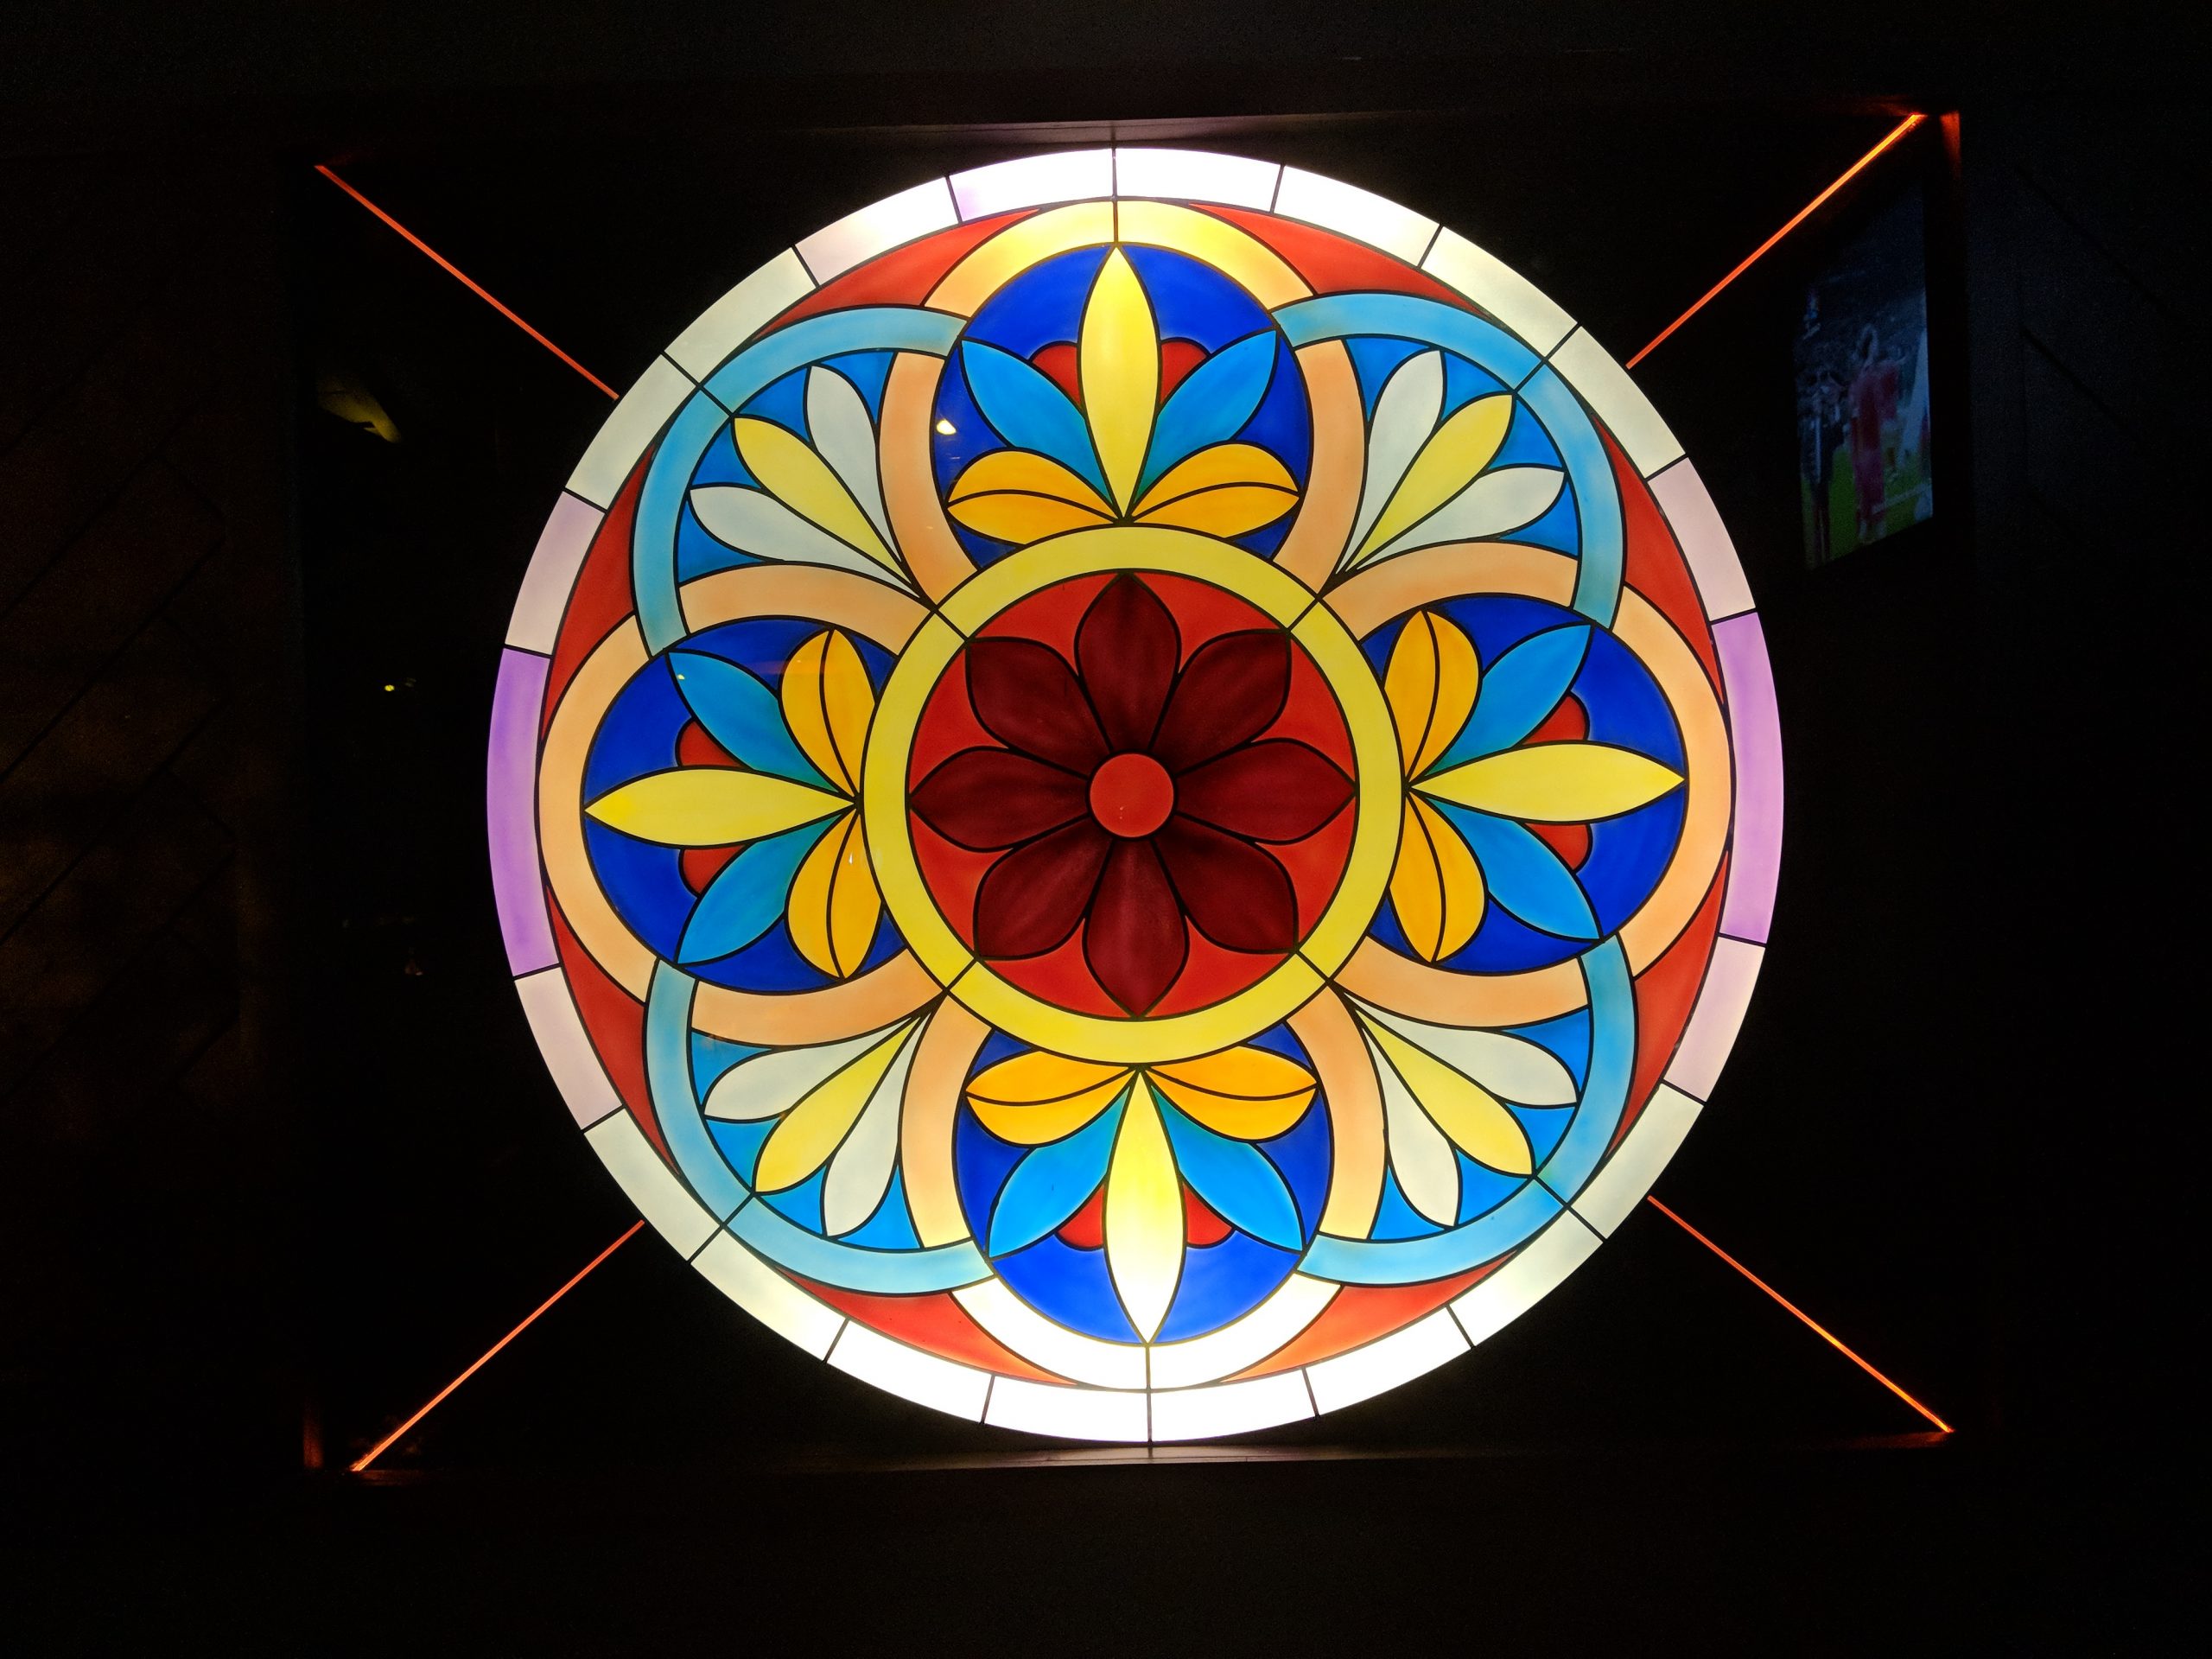 Stained glass artwork at The Mad Botonist Gin Bar in Hanoi, Vietnam.